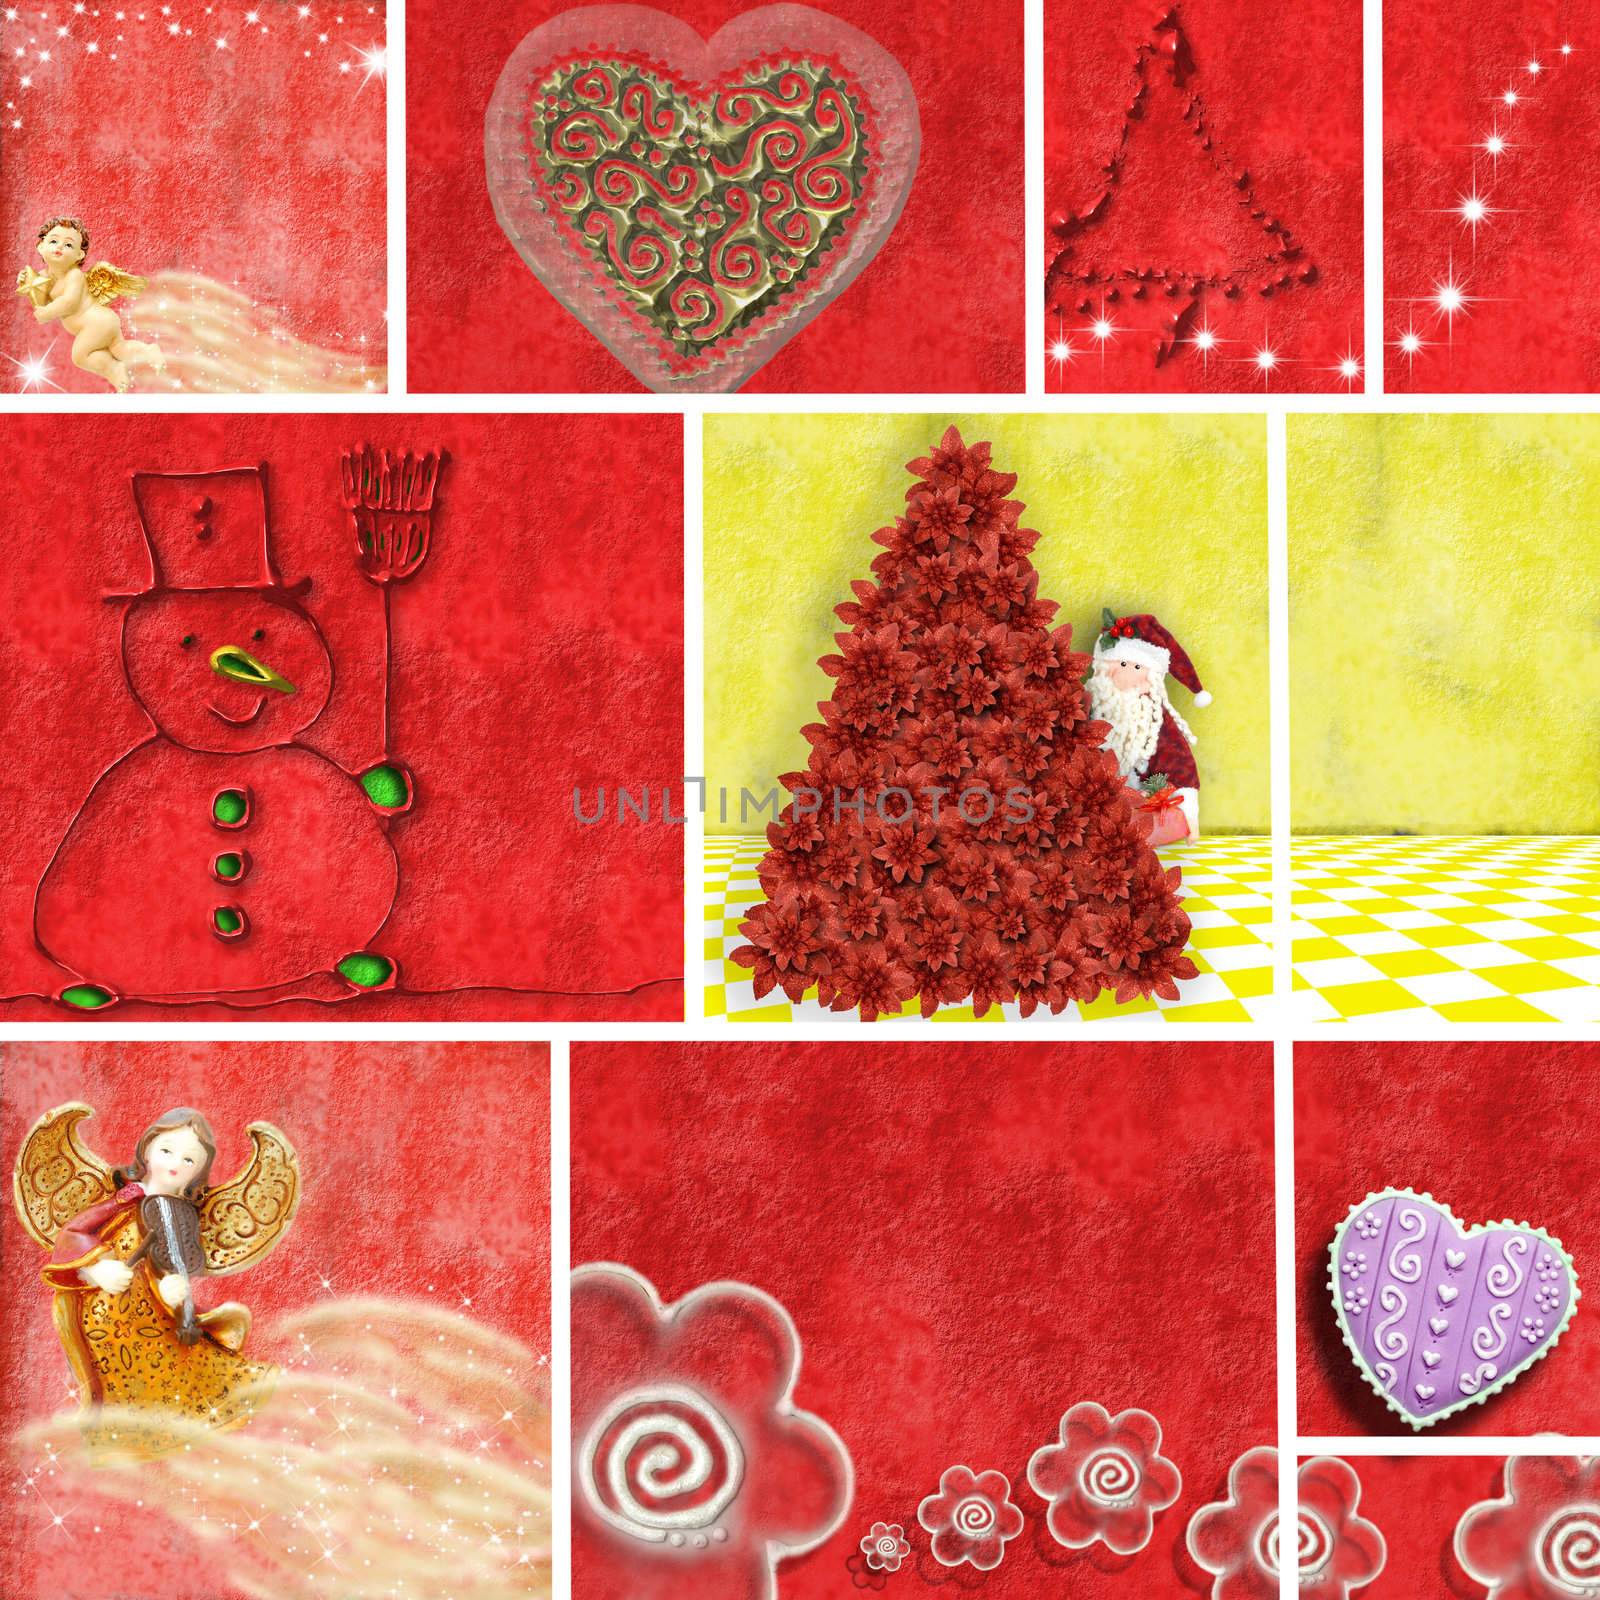 Christmas collage illustrations in shades of red and yellow